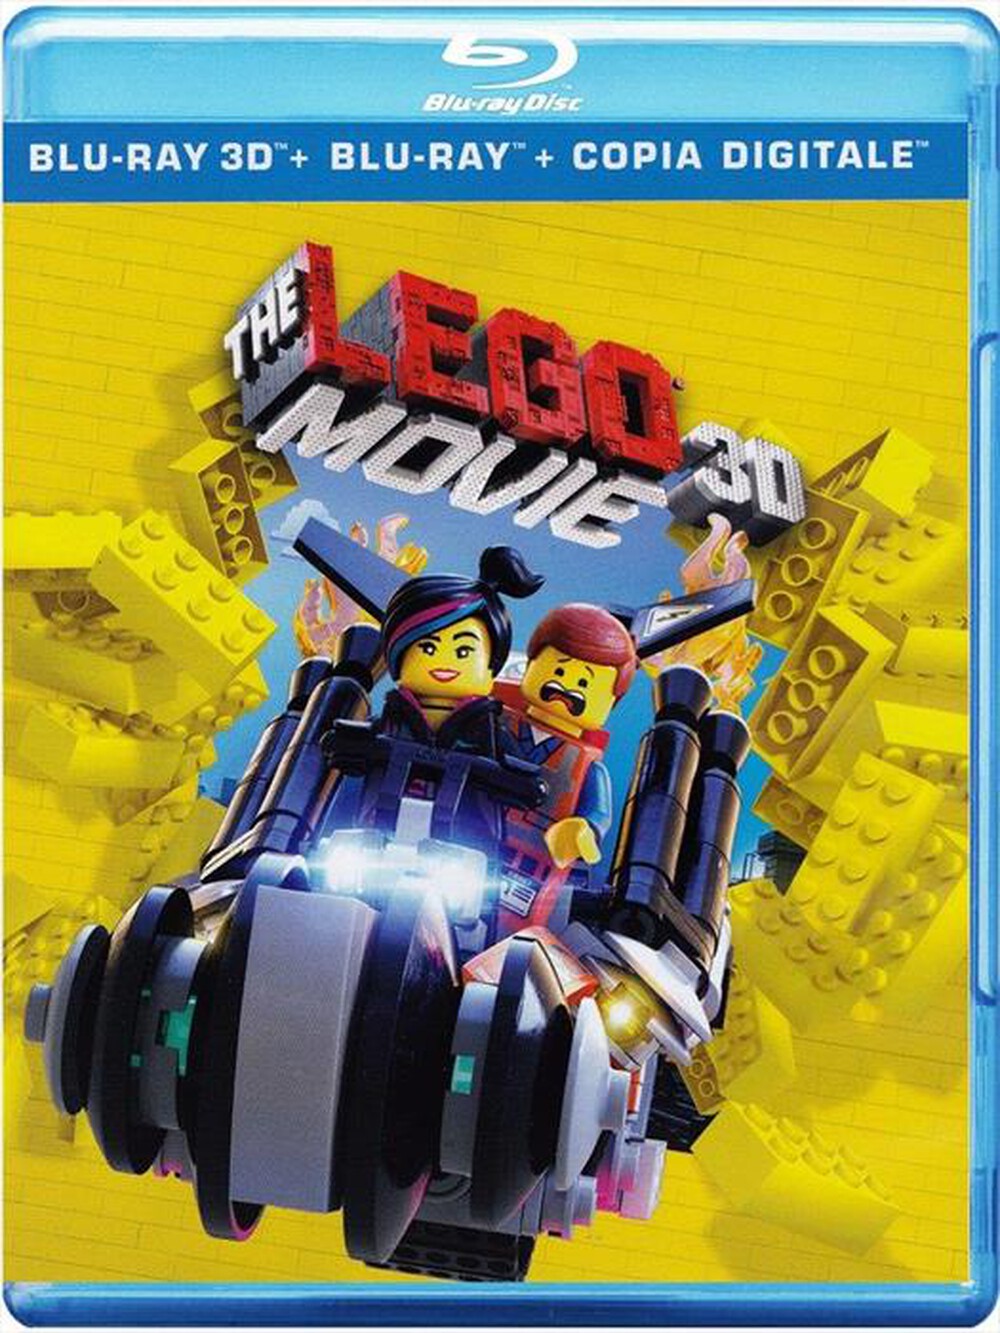 "WARNER HOME VIDEO - Lego Movie (The) (3D) (Blu-Ray 3D+Blu-Ray)"